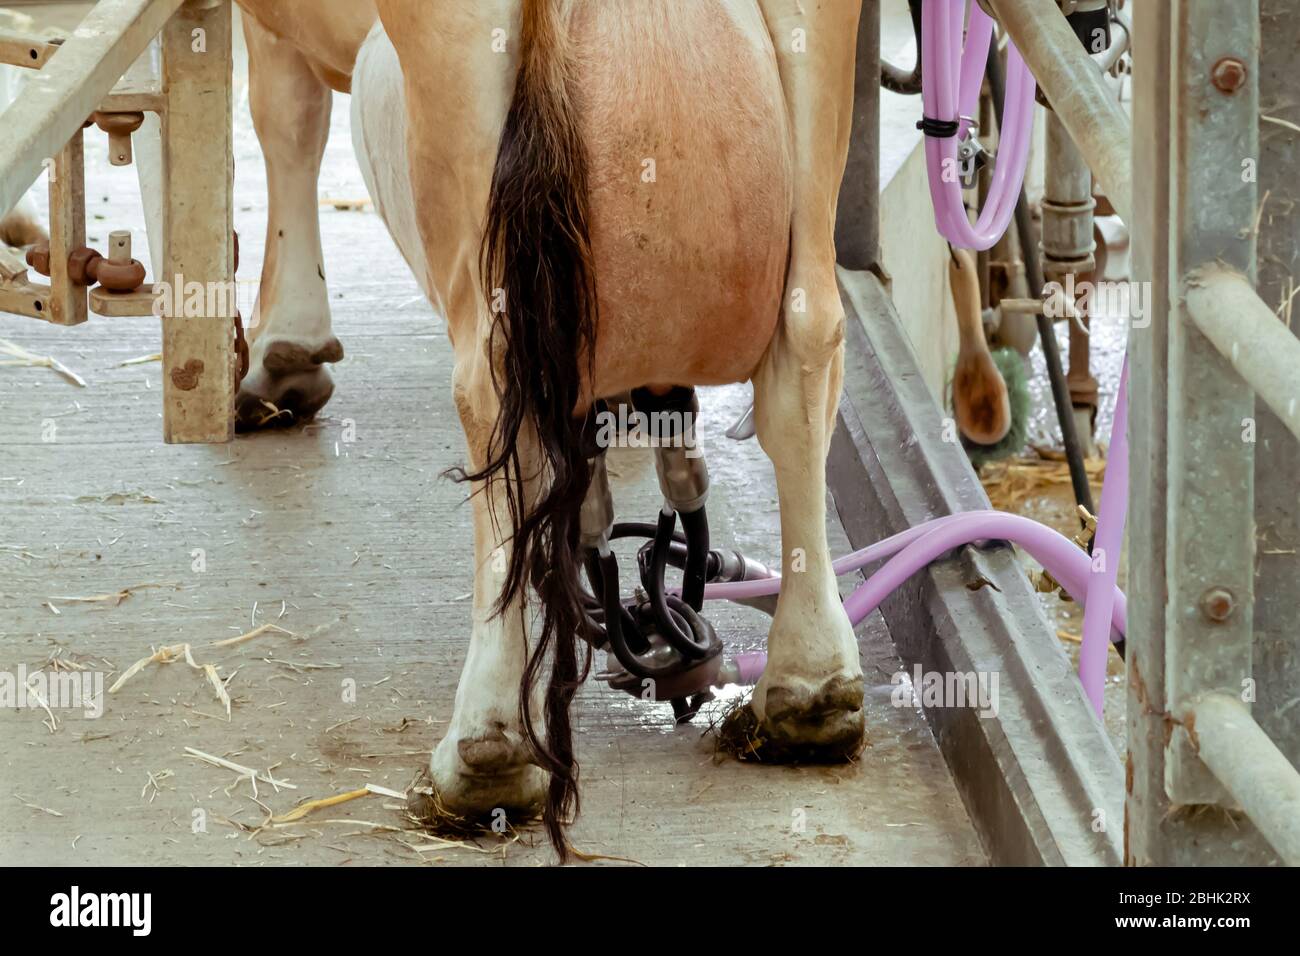 A Jersey cow with full udder attached to pipeline ready to be milked in a barn Stock Photo